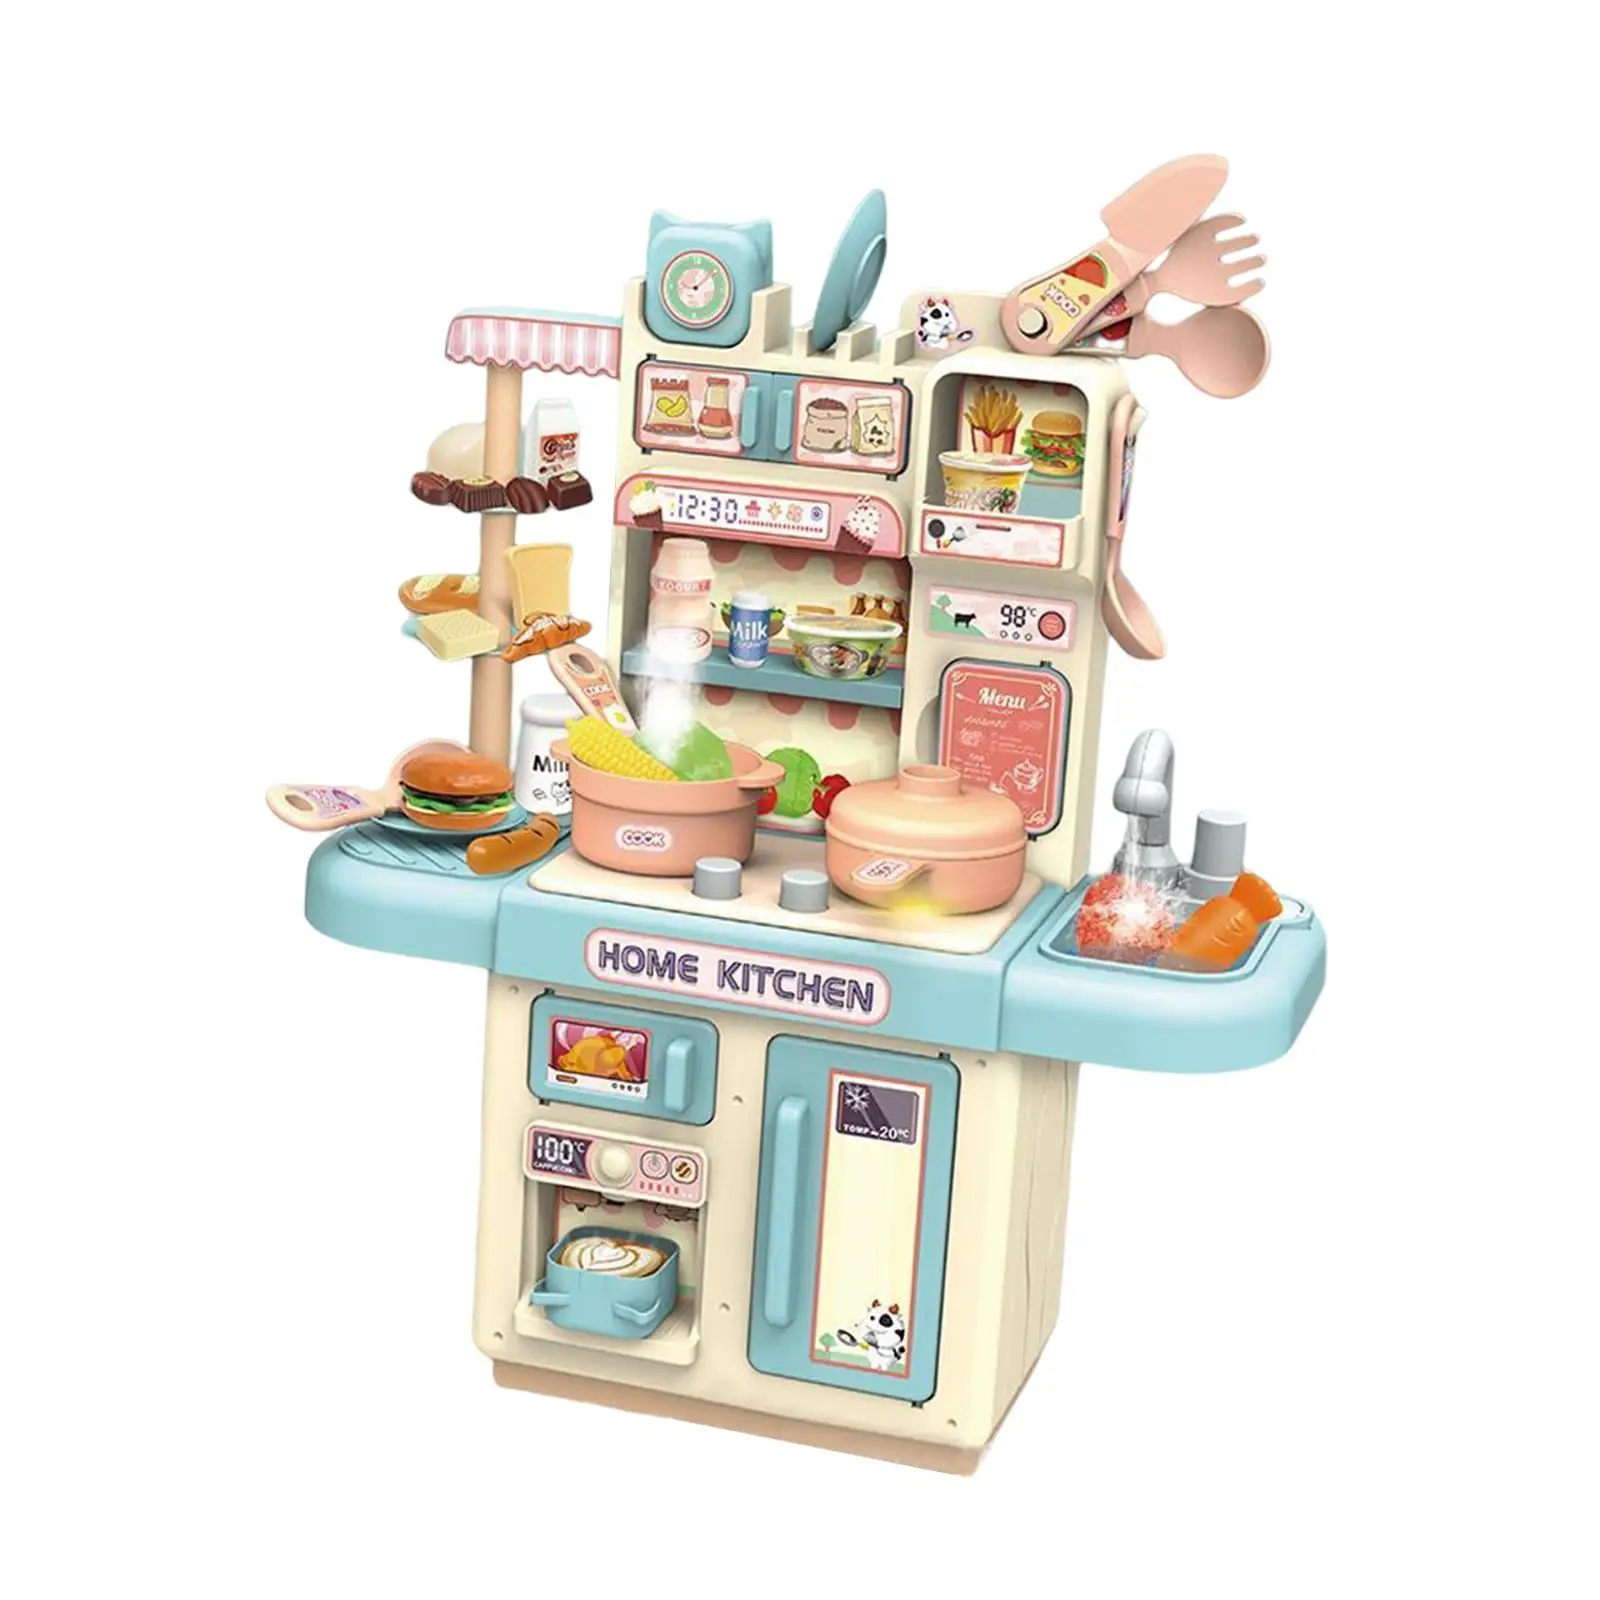 Simulation Kids Kitchen Toys Pretend Play Fine Motor Skills Cooking Learning Toys for Toddlers Kids Preschool Children Gifts